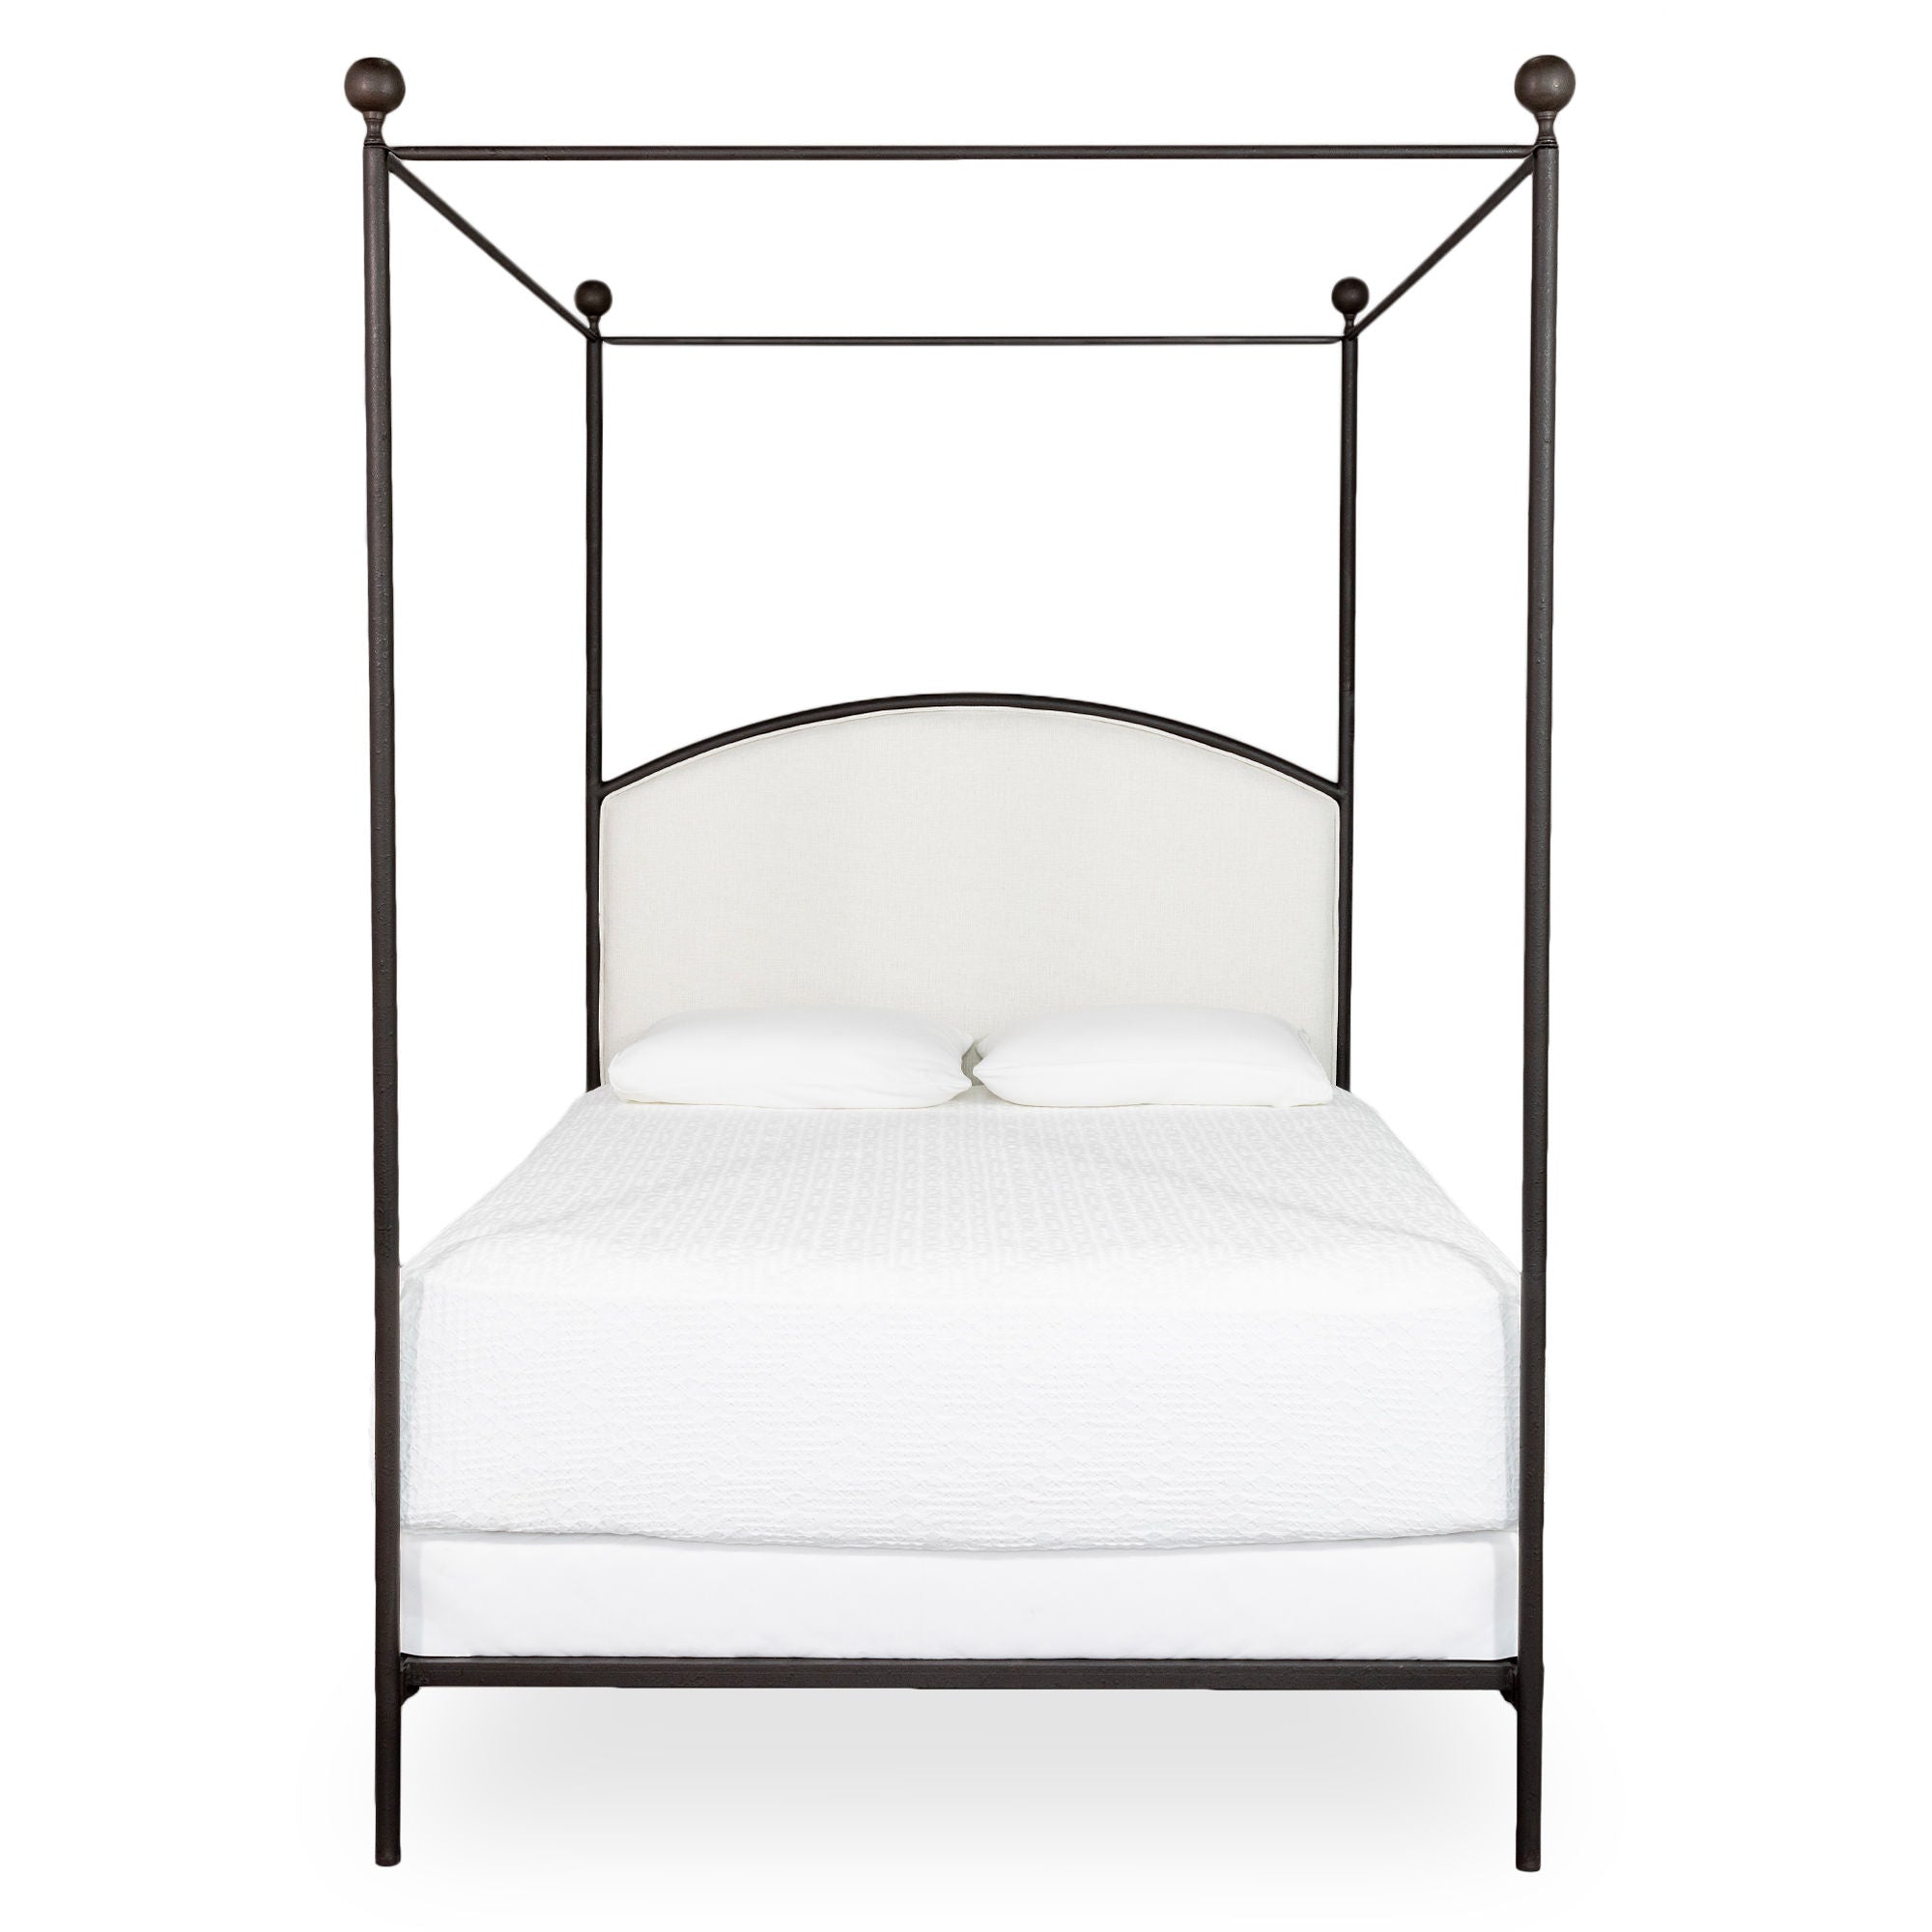 French Campaign Canopy Bed - Worthen Custom Iron & Brass Furniture